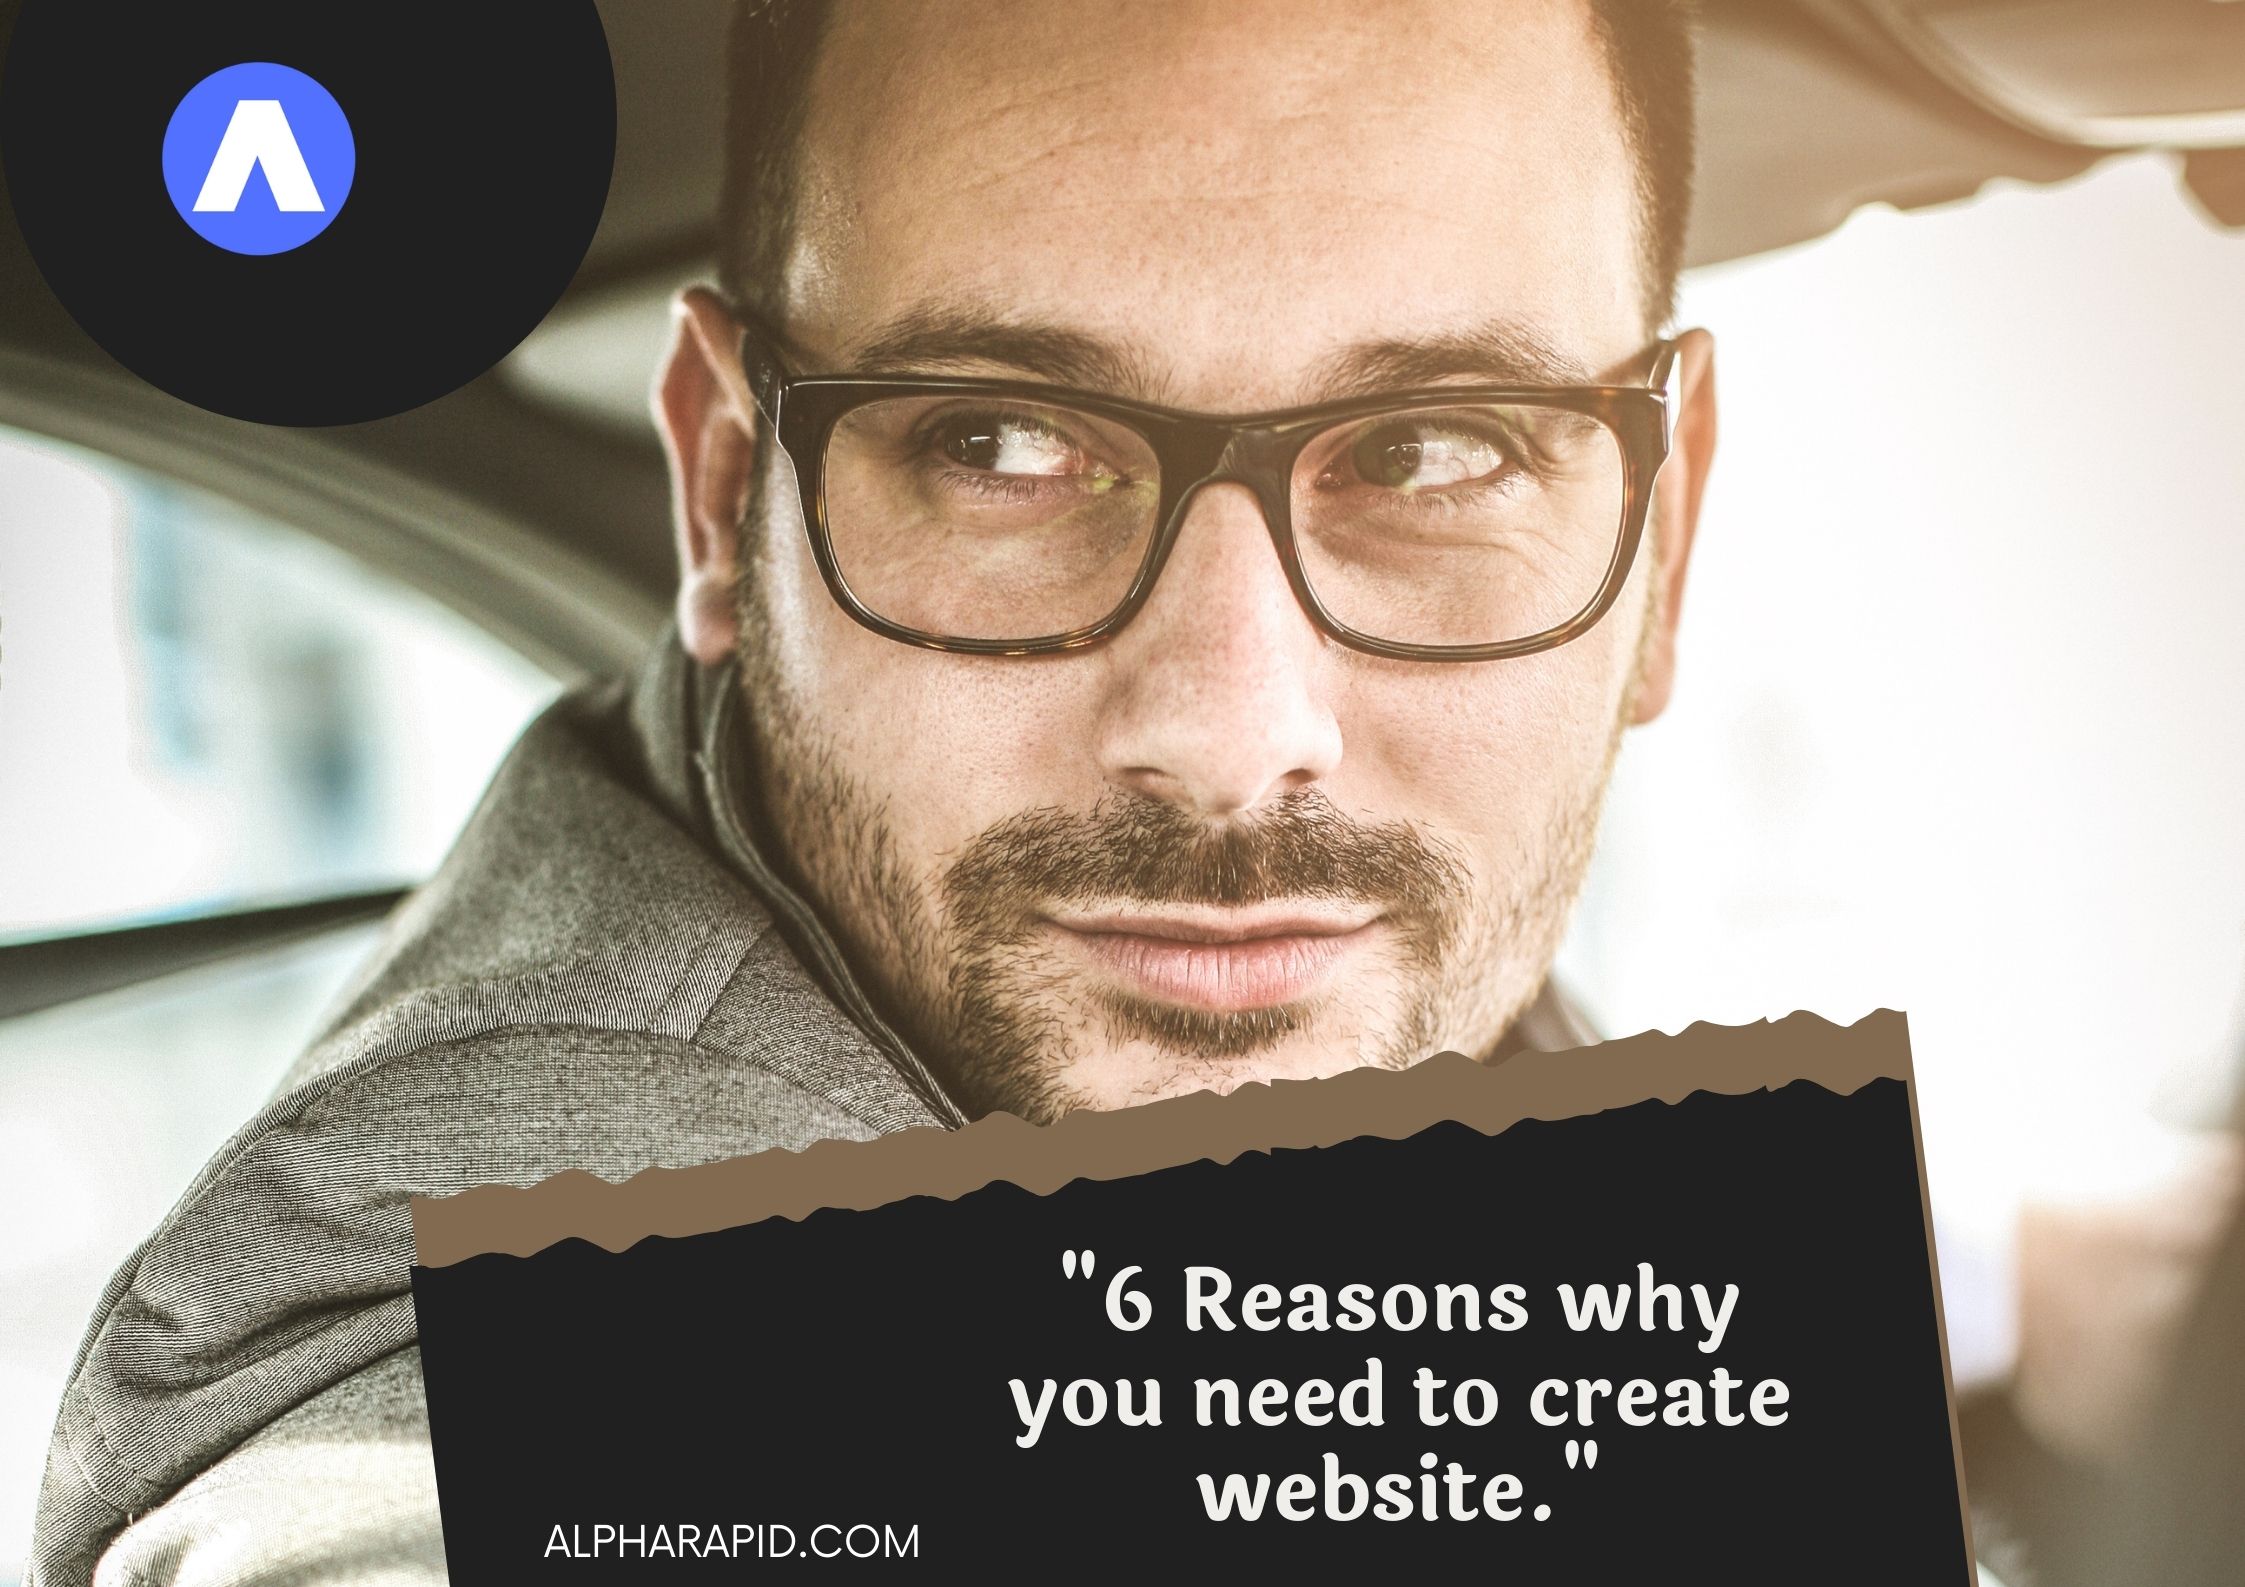 6 Reasons why you need to create a website.